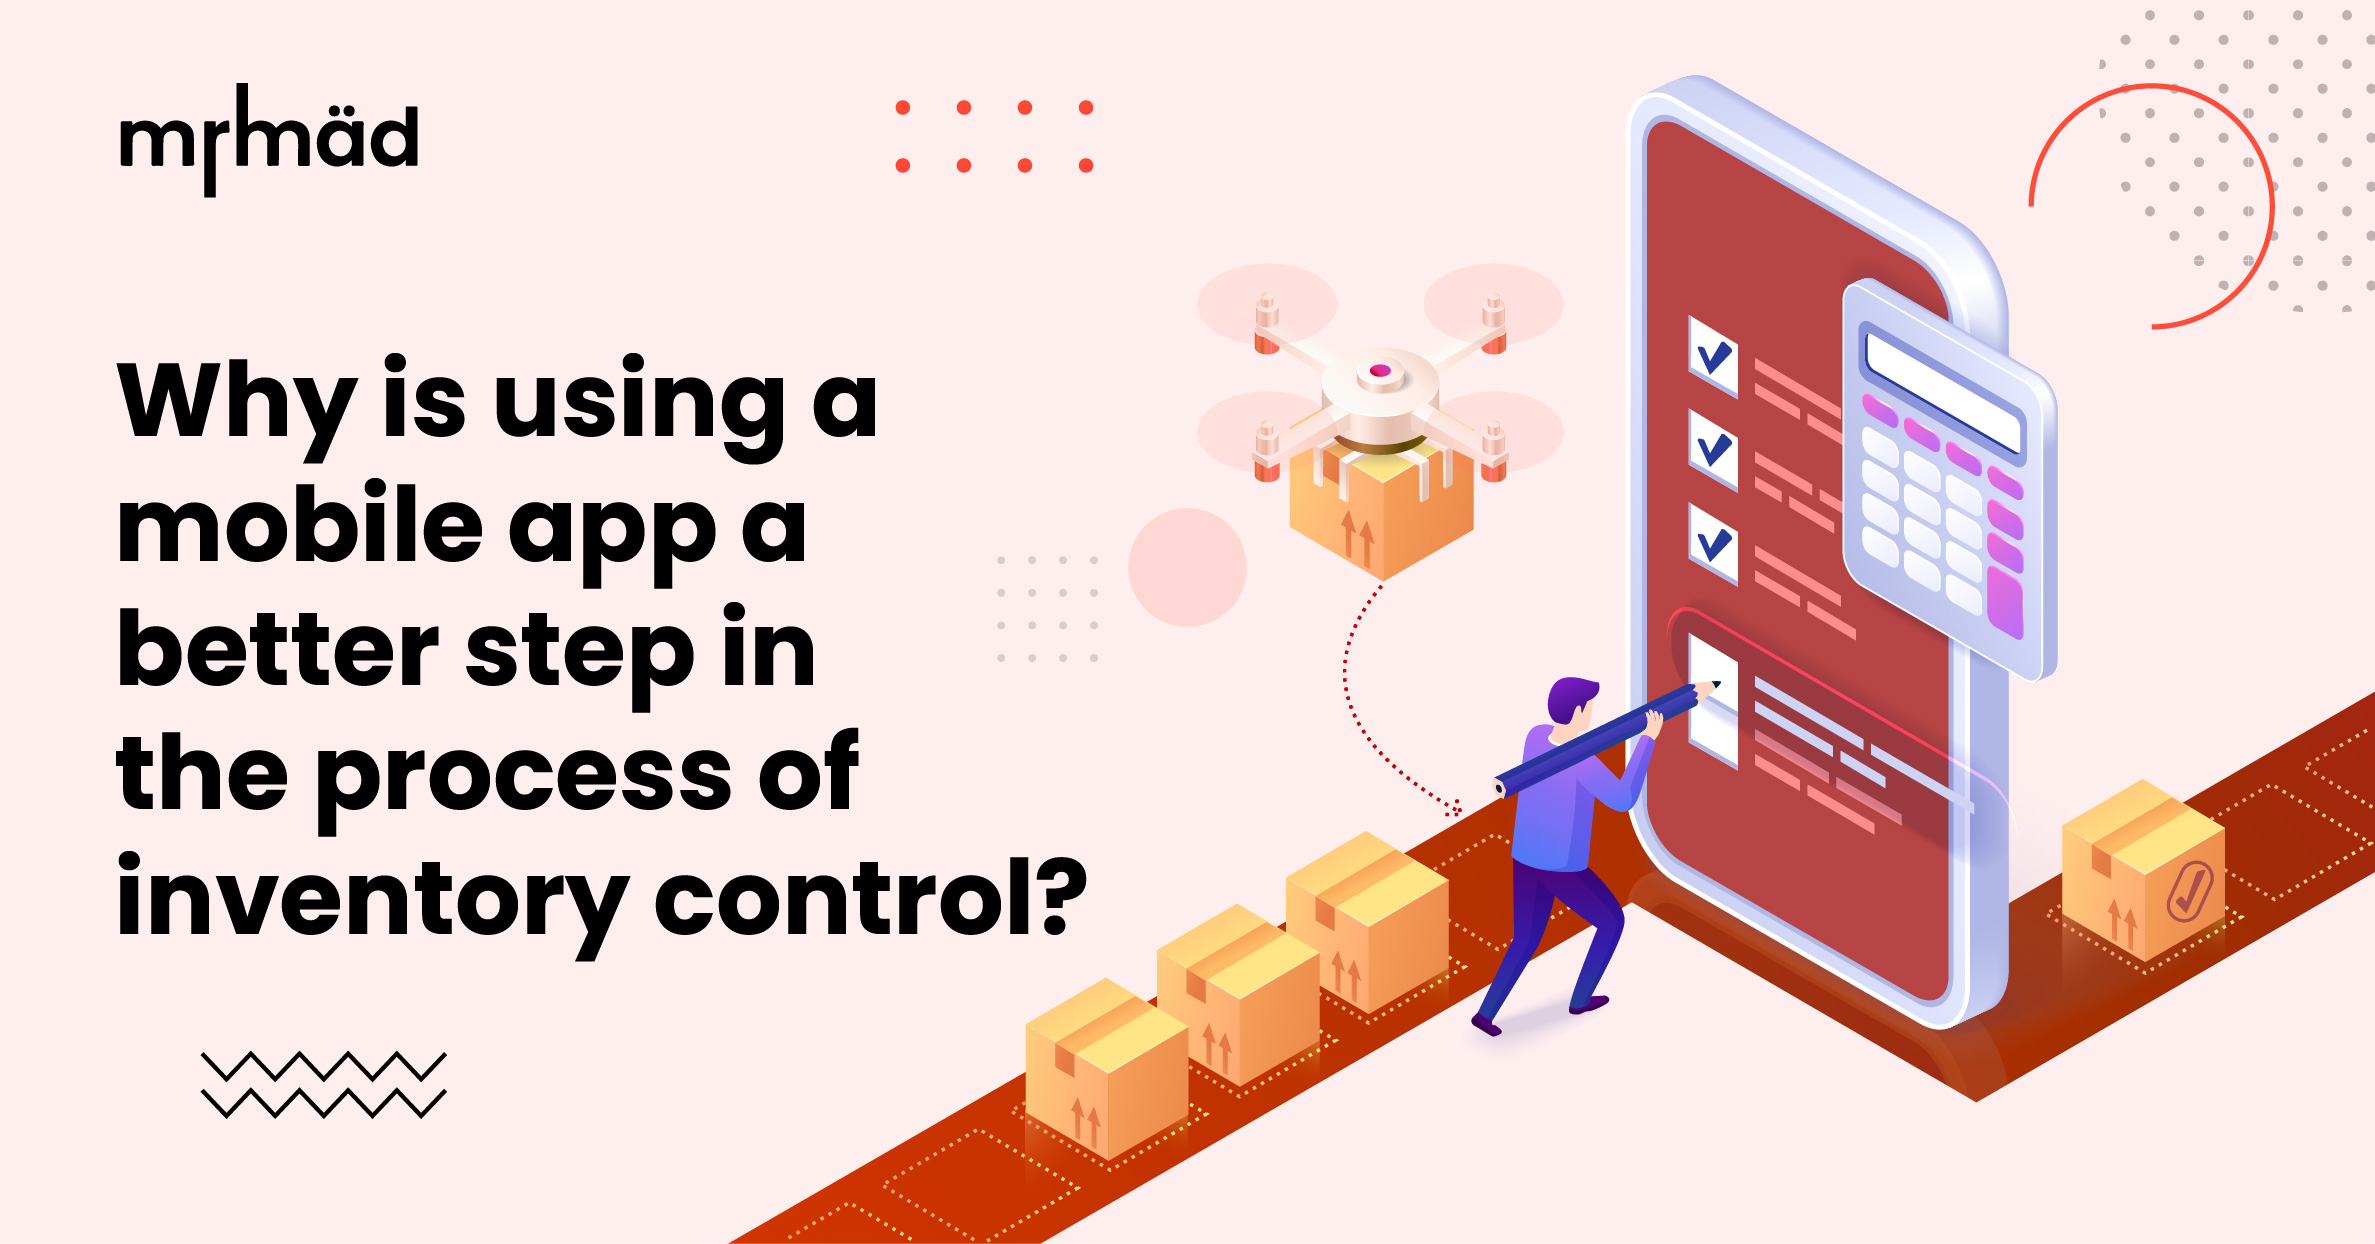 Why is using a mobile app a better step in the process of inventory control?